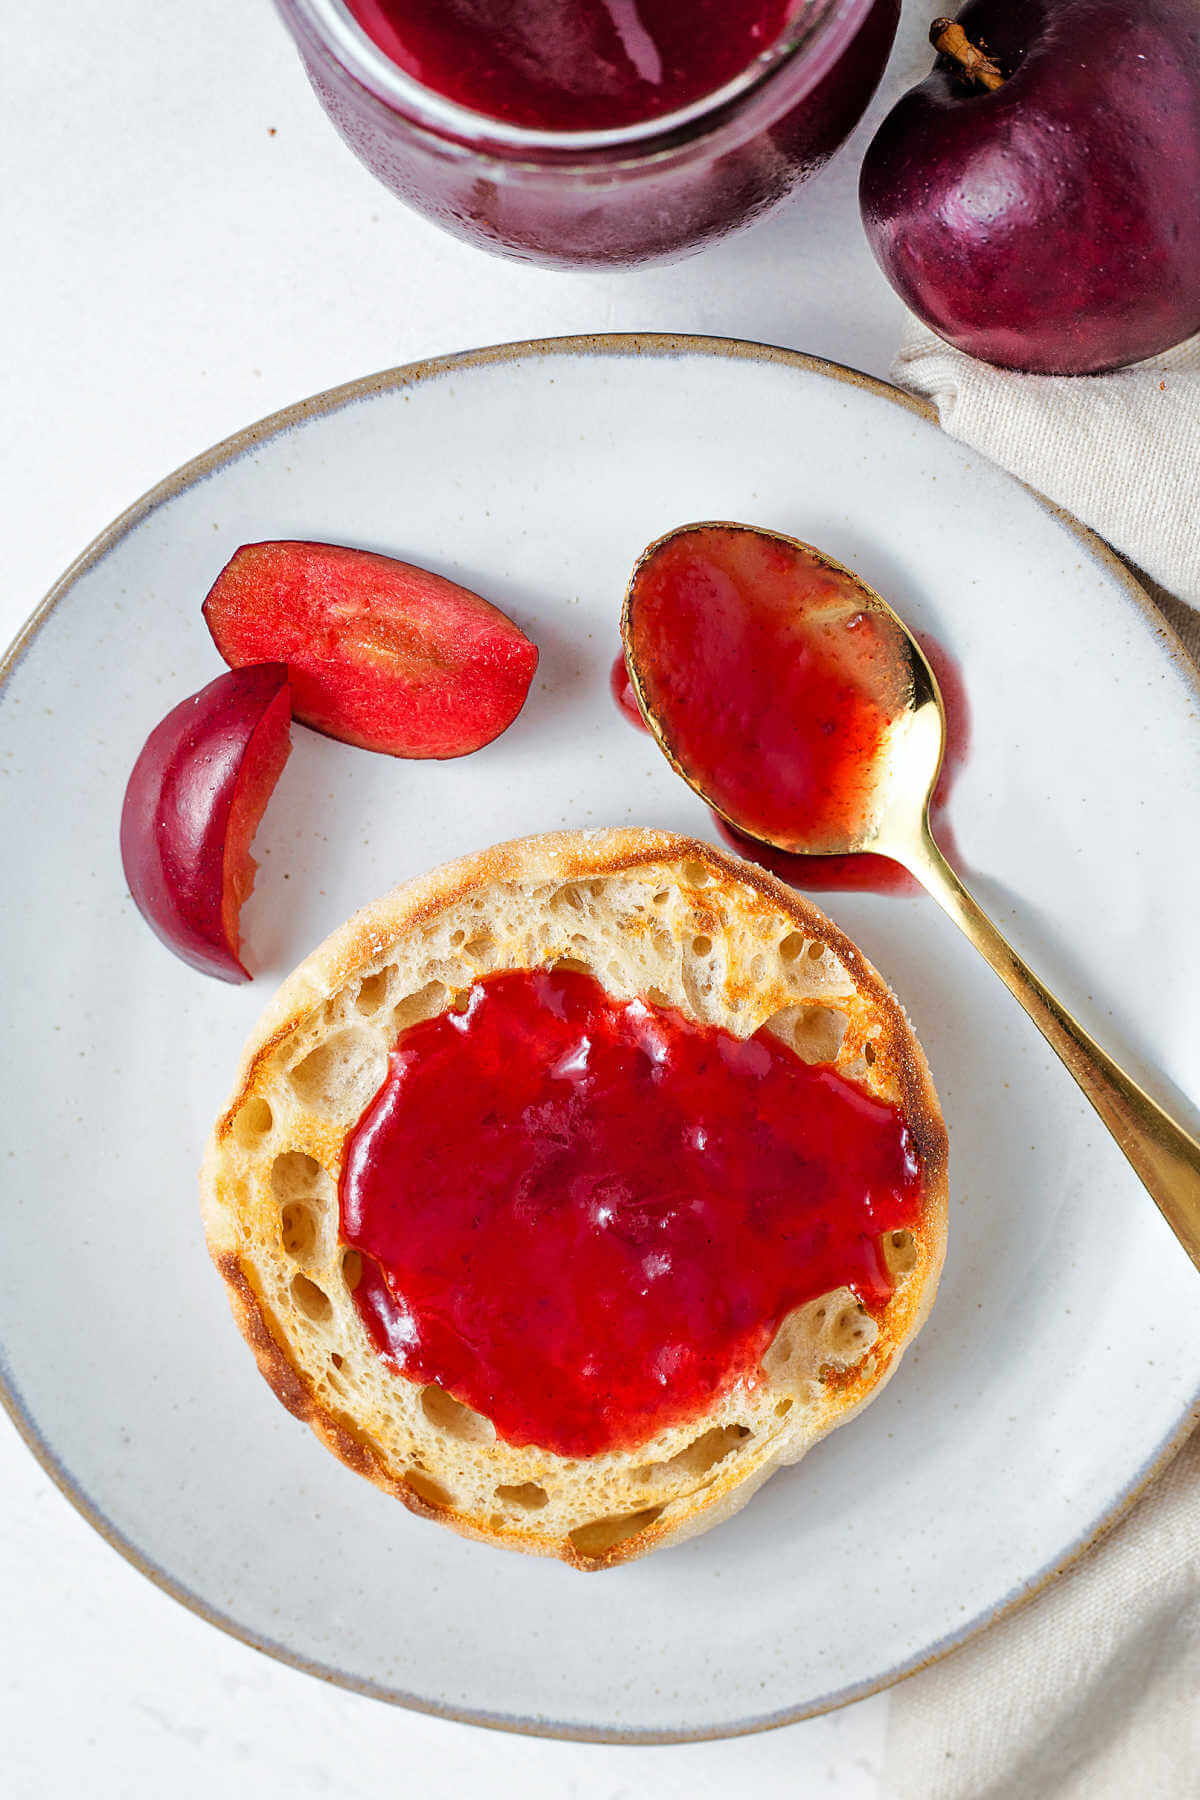 plum jam spread on an English muffin on a plate.